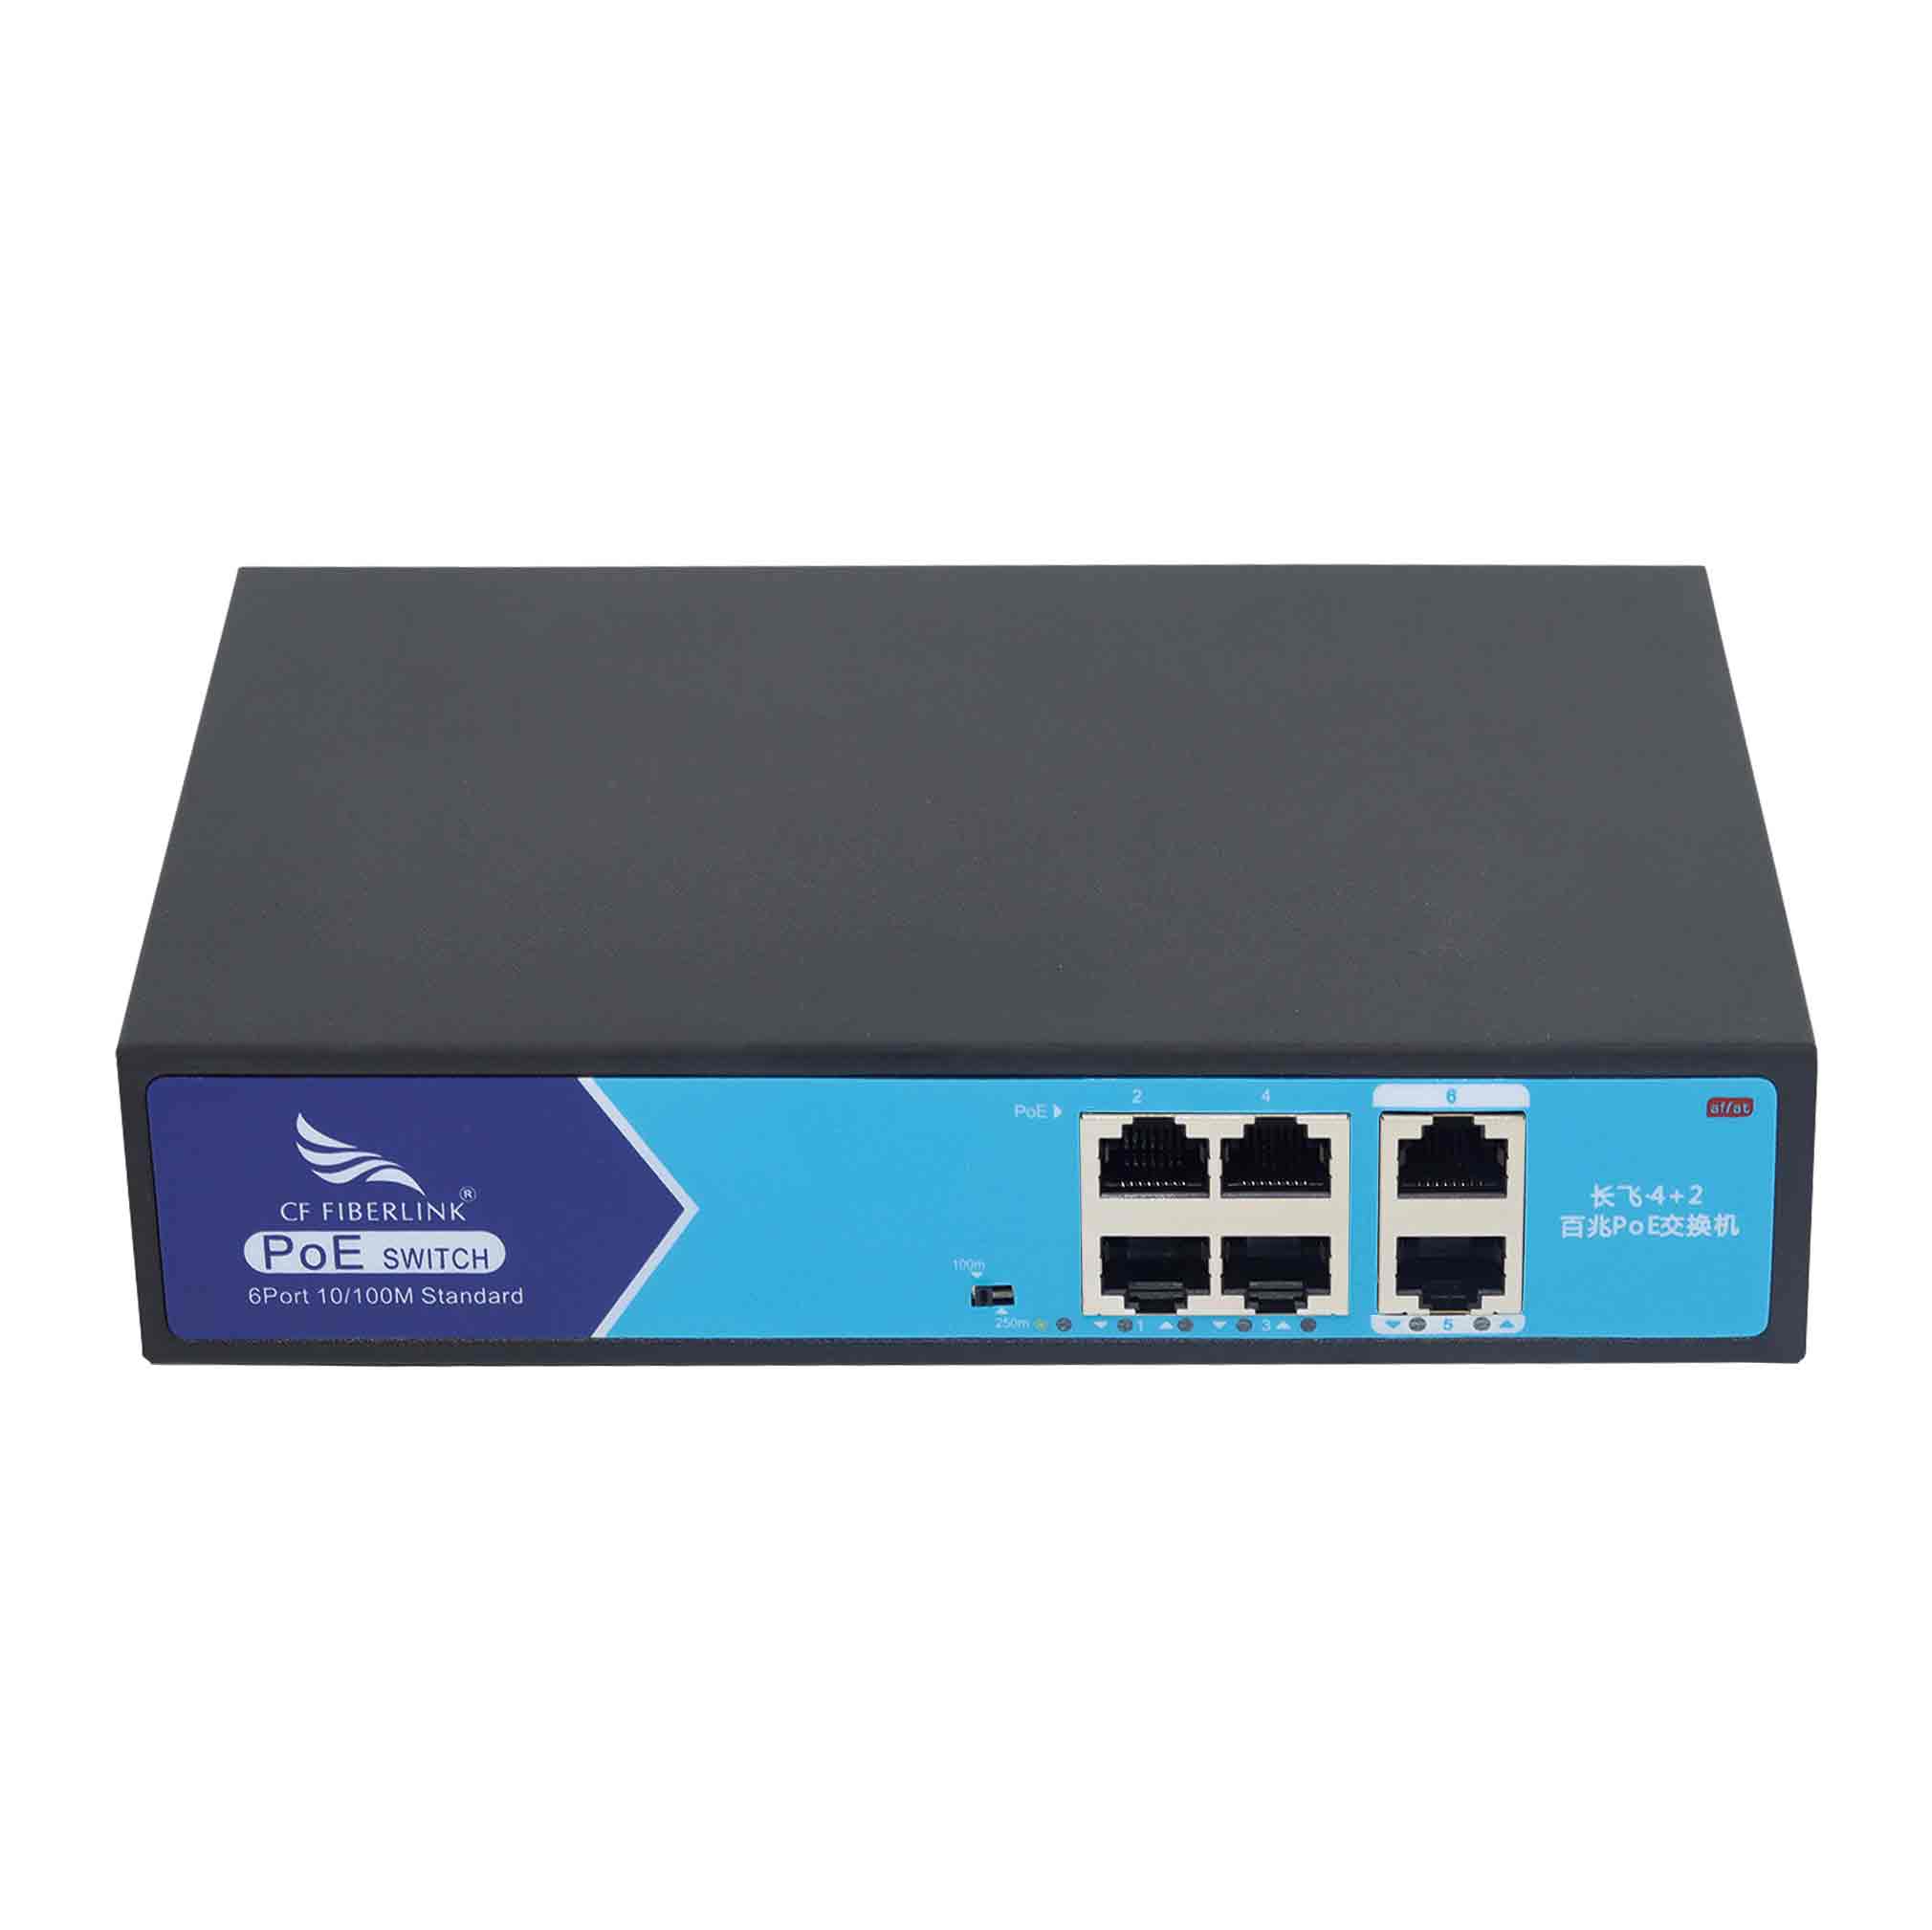 4+2 Hundred PoE switch Featured Image